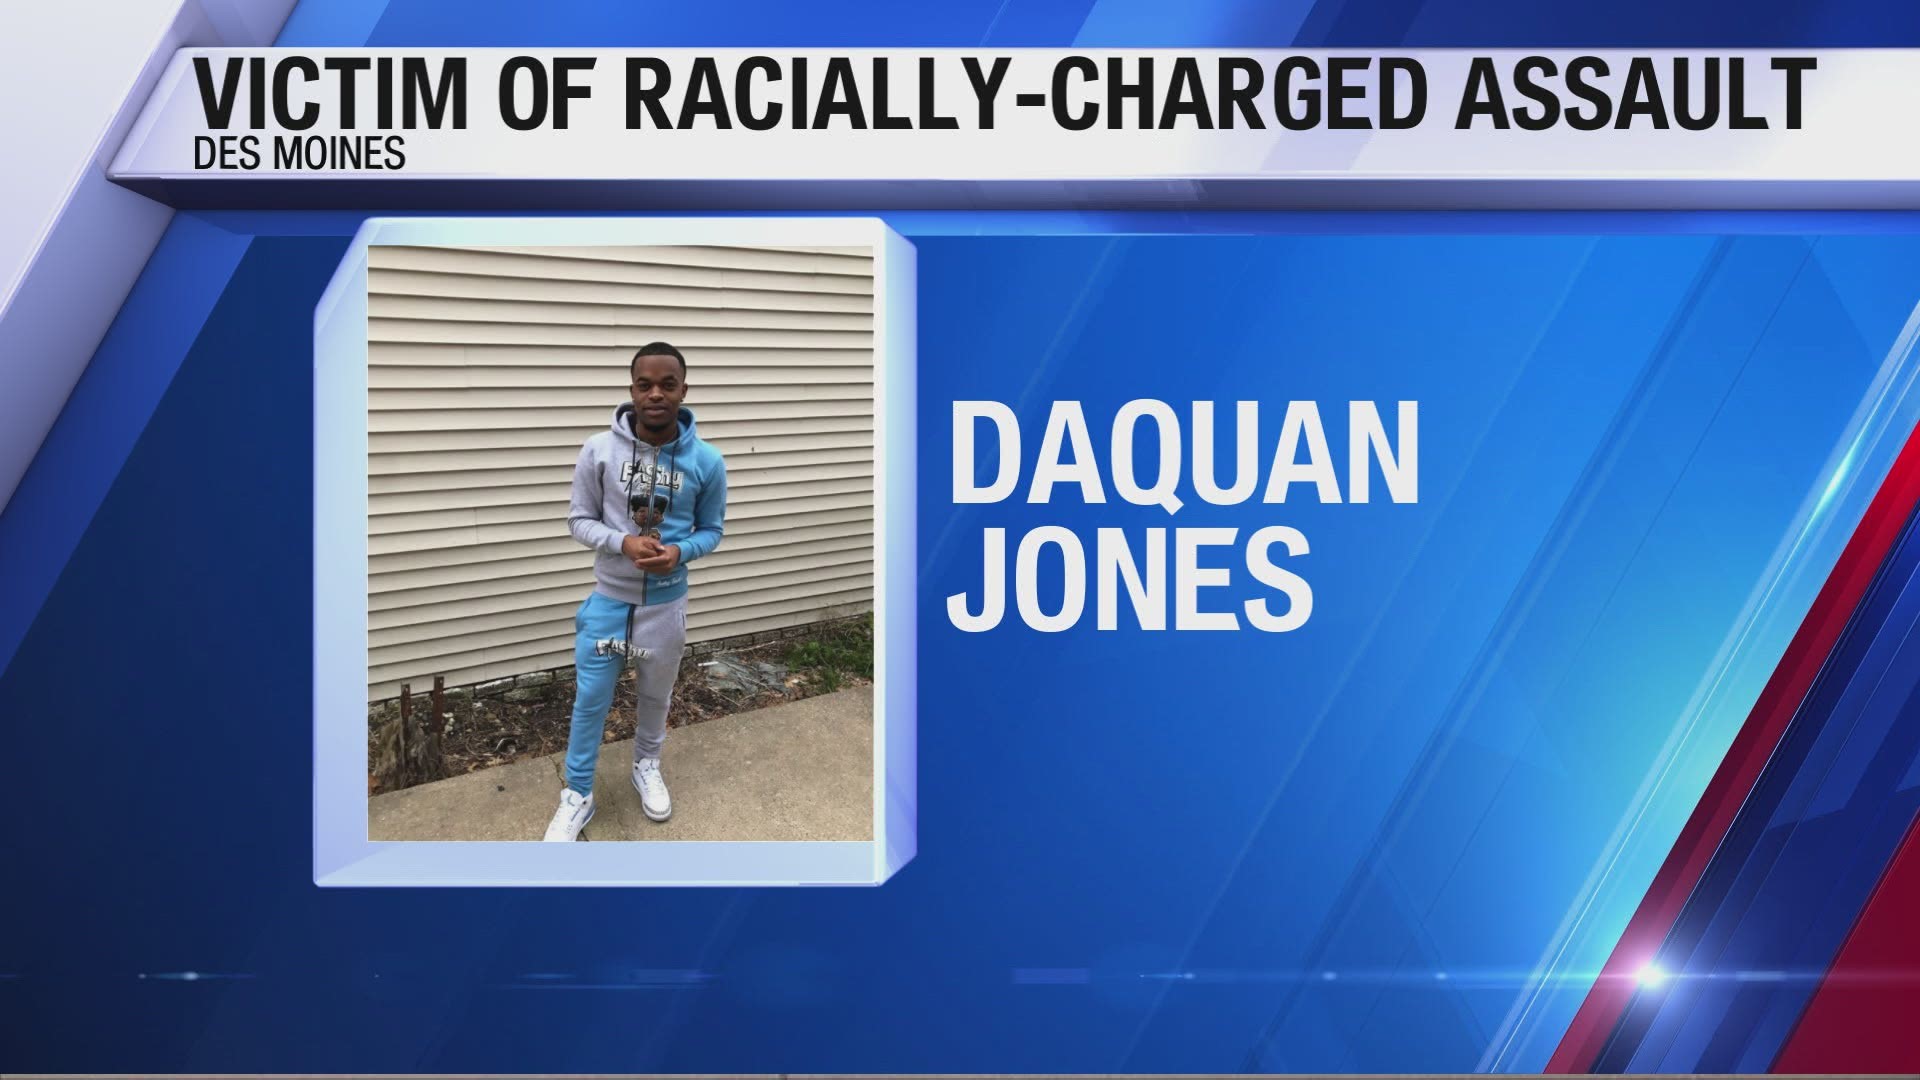 DaQuan Jones, 22, said he was attacked by white men who made racist comments at him during the assault.